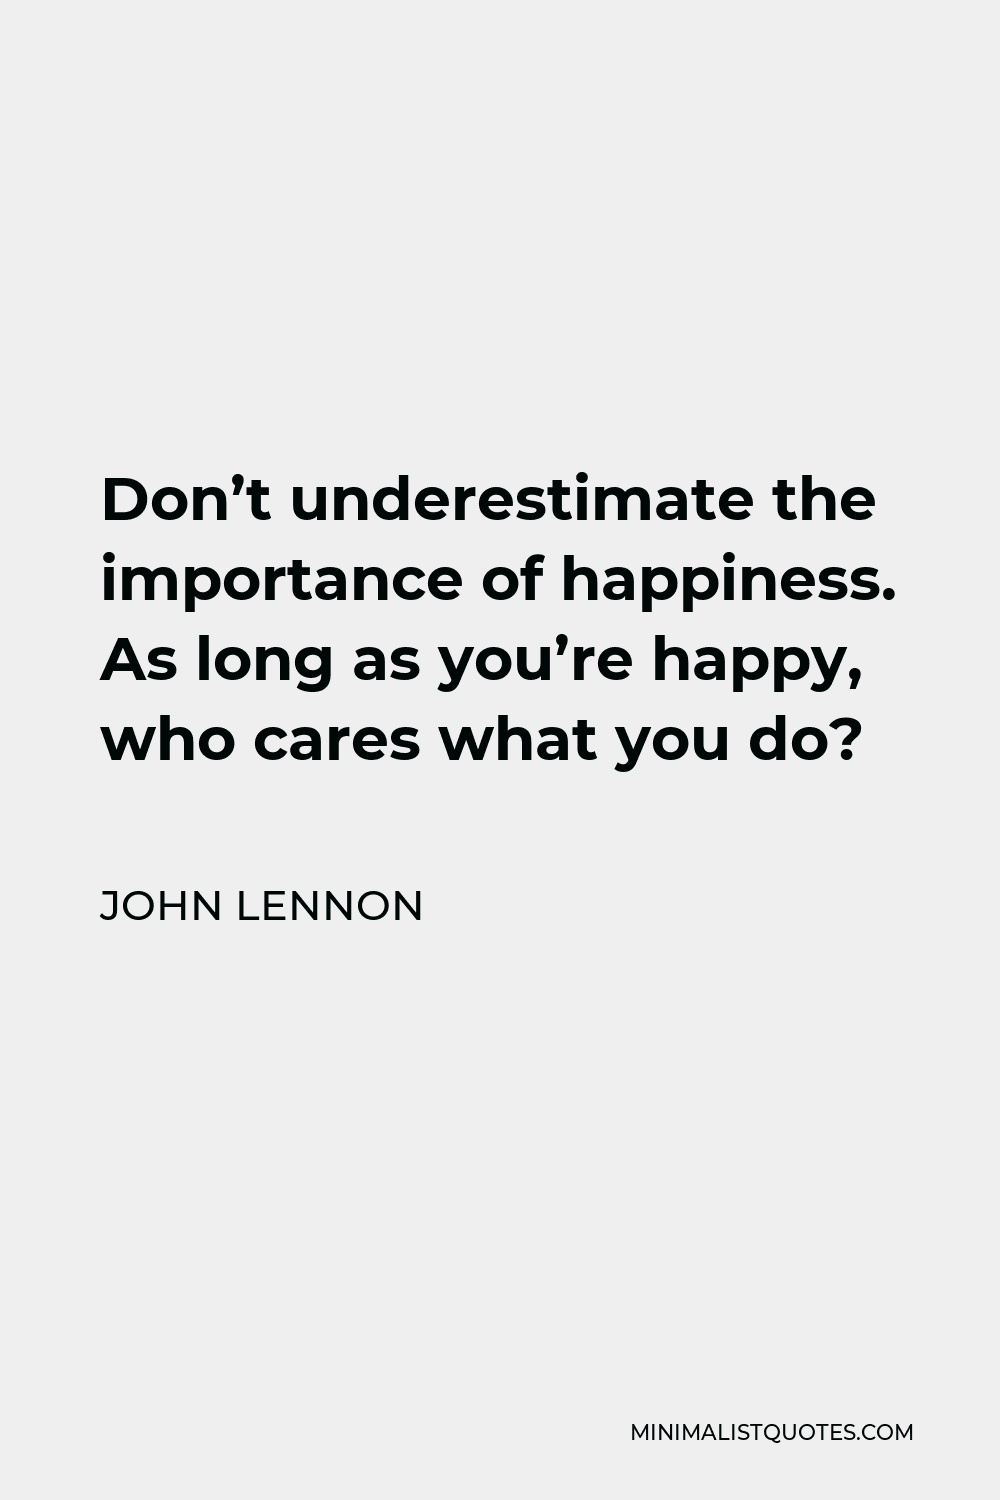 John Lennon Quote - Don’t underestimate the importance of happiness. As long as you’re happy, who cares what you do?